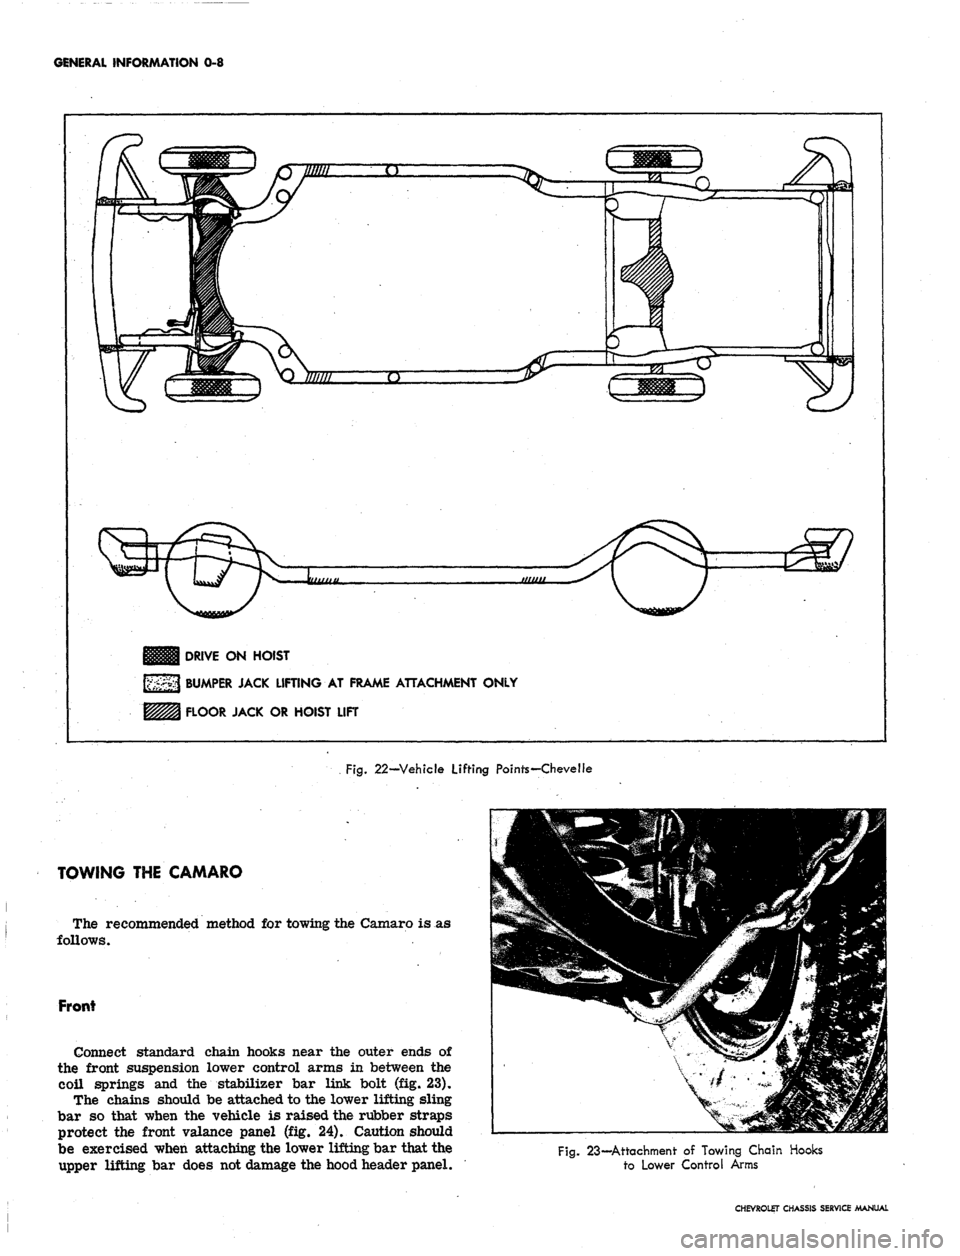 CHEVROLET CAMARO 1967 1.G Chassis Workshop Manual 
GENERAL INFORMATION 0-8

nun

Illllfl Q

i,,,,,,,,

DRIVE ON HOIST

BUMPER JACK LIFTING AT FRAME ATTACHMENT ONLY

FLOOR JACK OR HOIST LIFT

Fig.
 22—Vehicle Lifting Points—Chevelle

TOWING THE CA